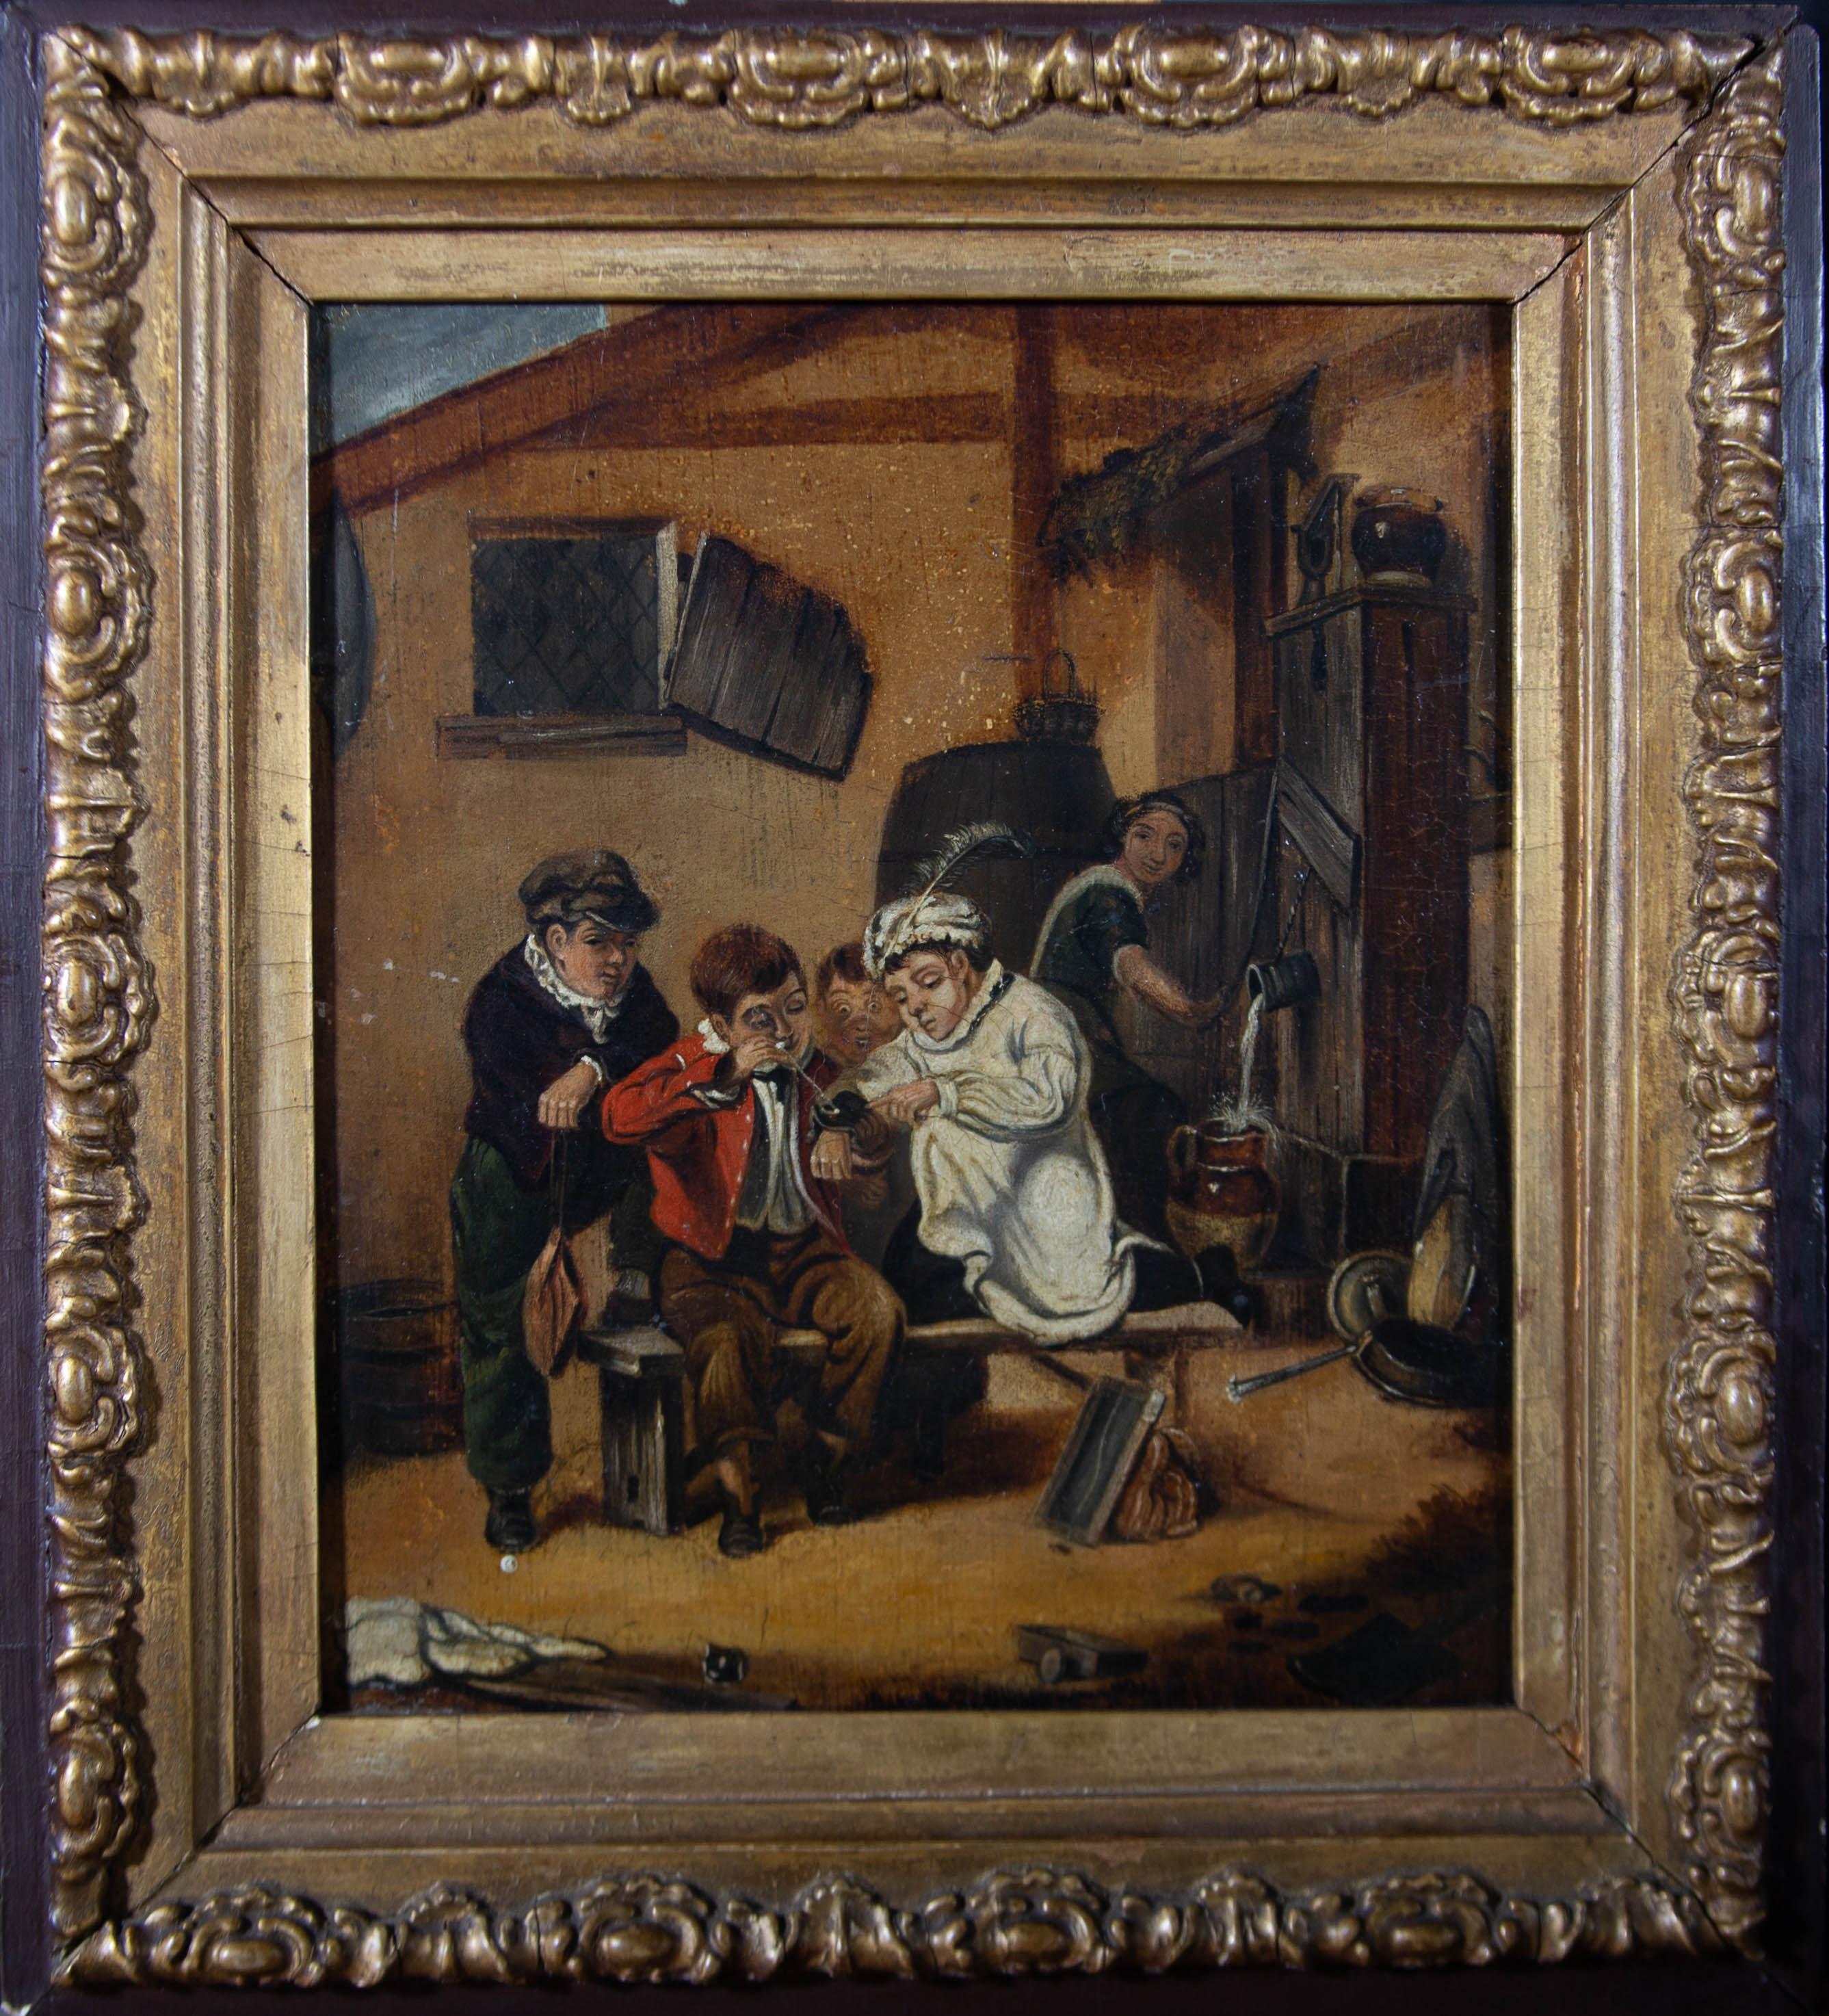 A naive painting in which a group of children scrutinise something on the sleeve of the boy in white. Many elements of the scene humorously suggest a sense of chaos, such as the shutter nearly falling off its hinges and the water bouncing off the